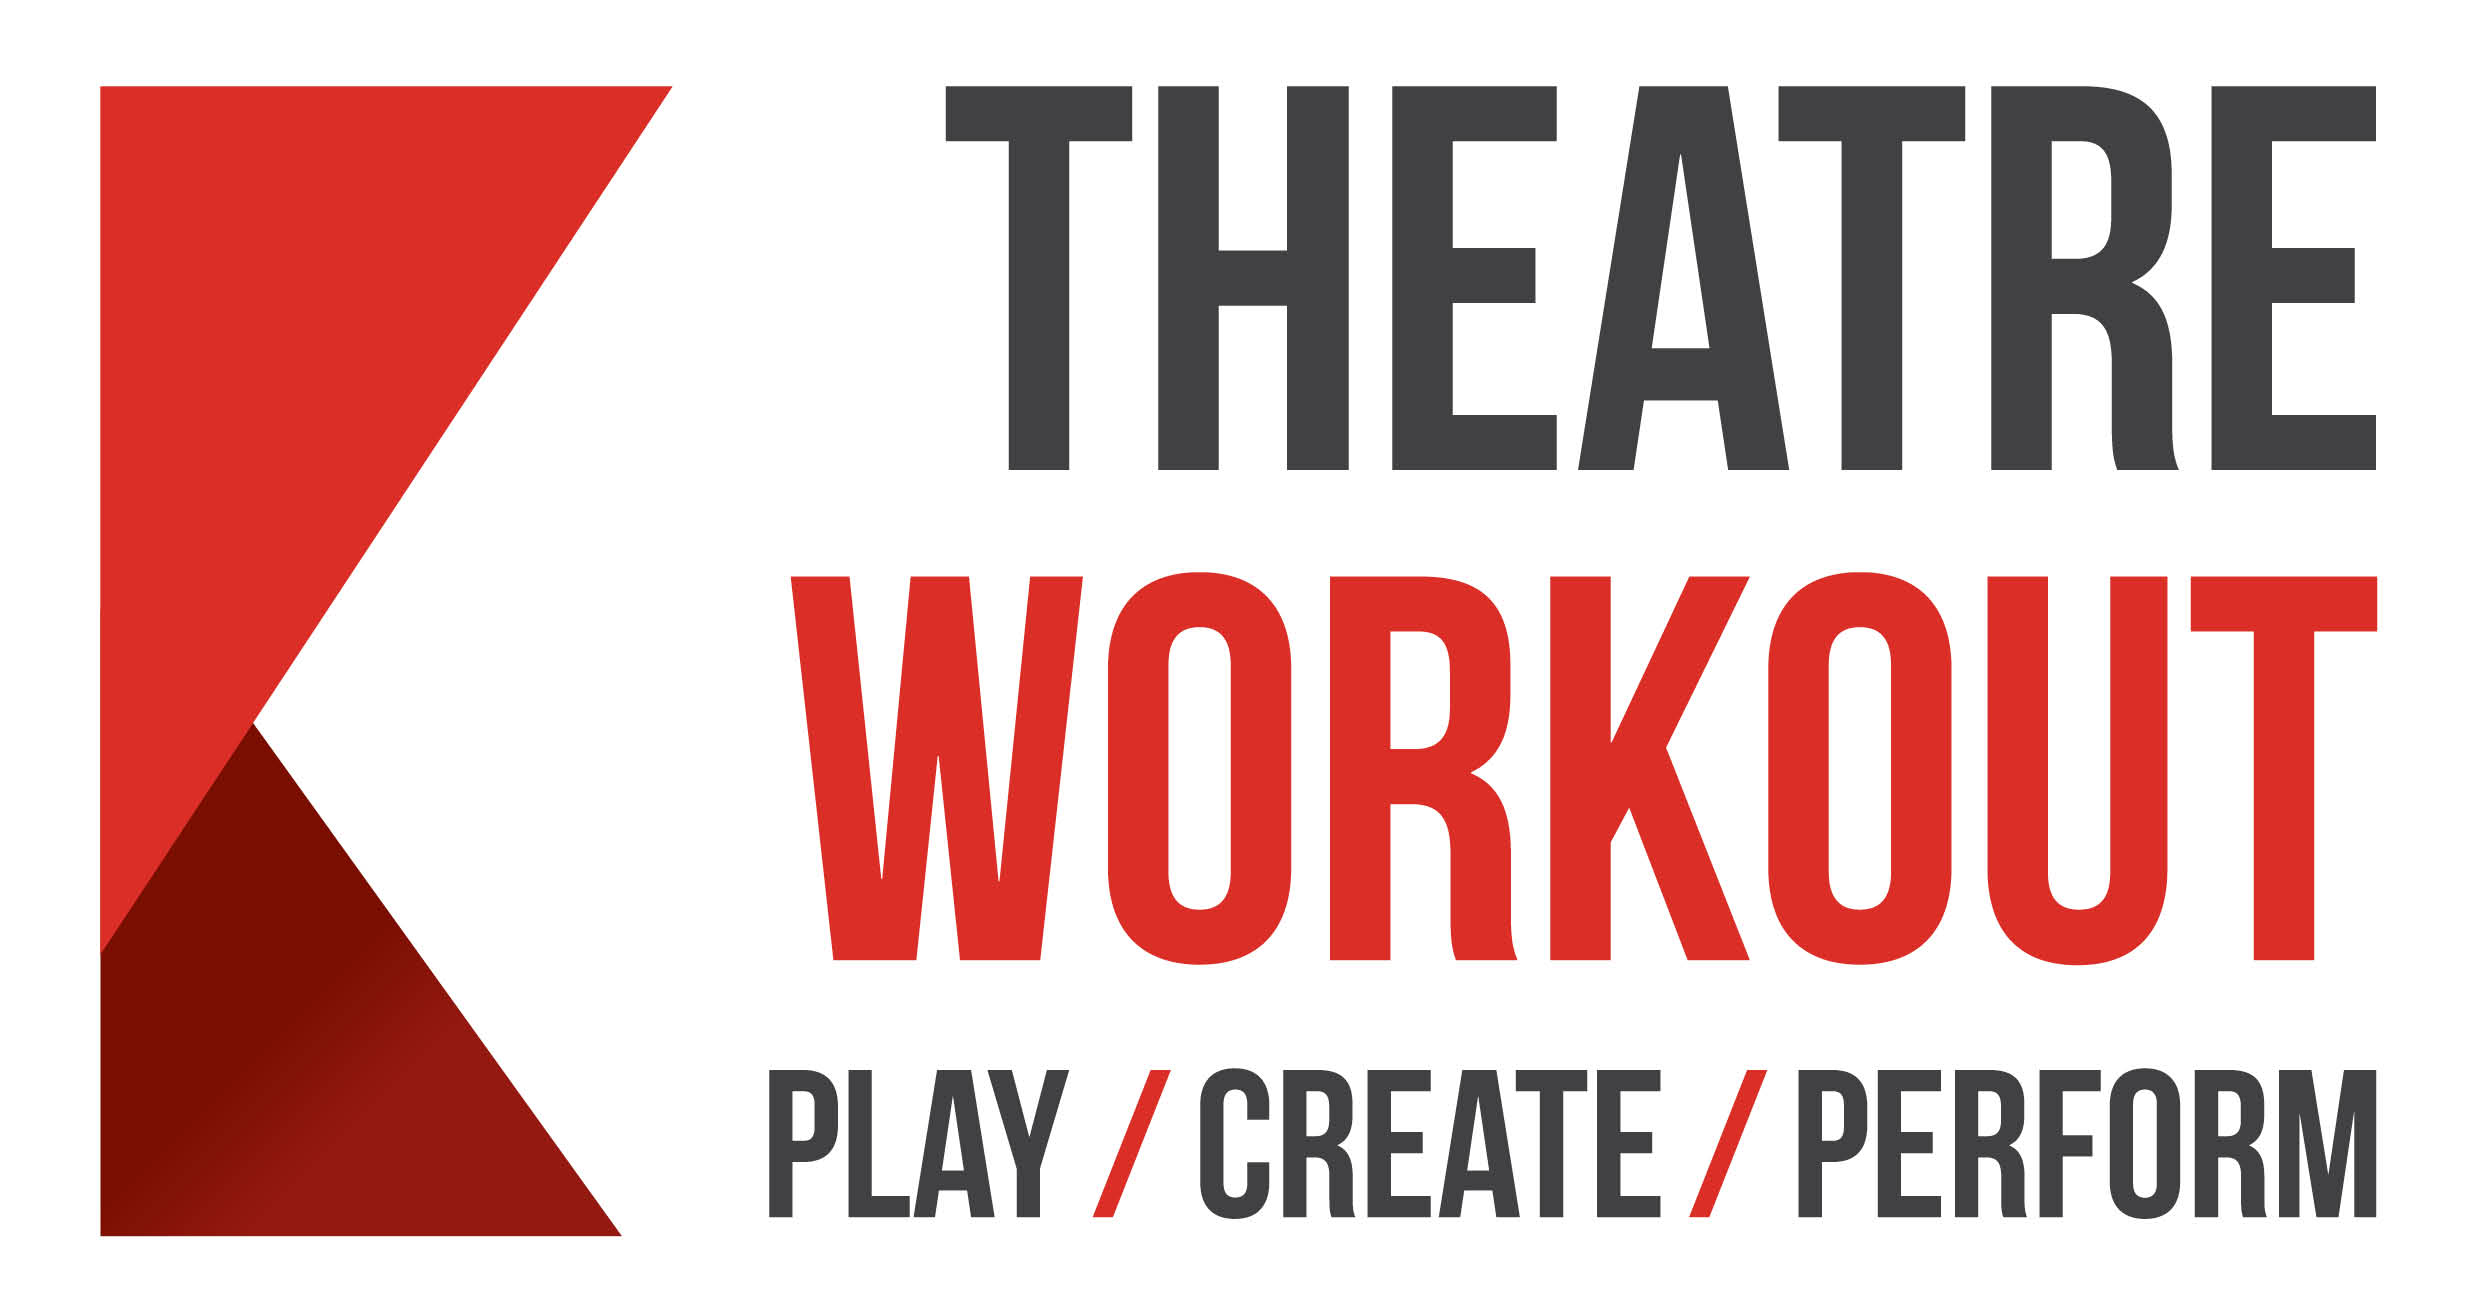 Theatre Workout